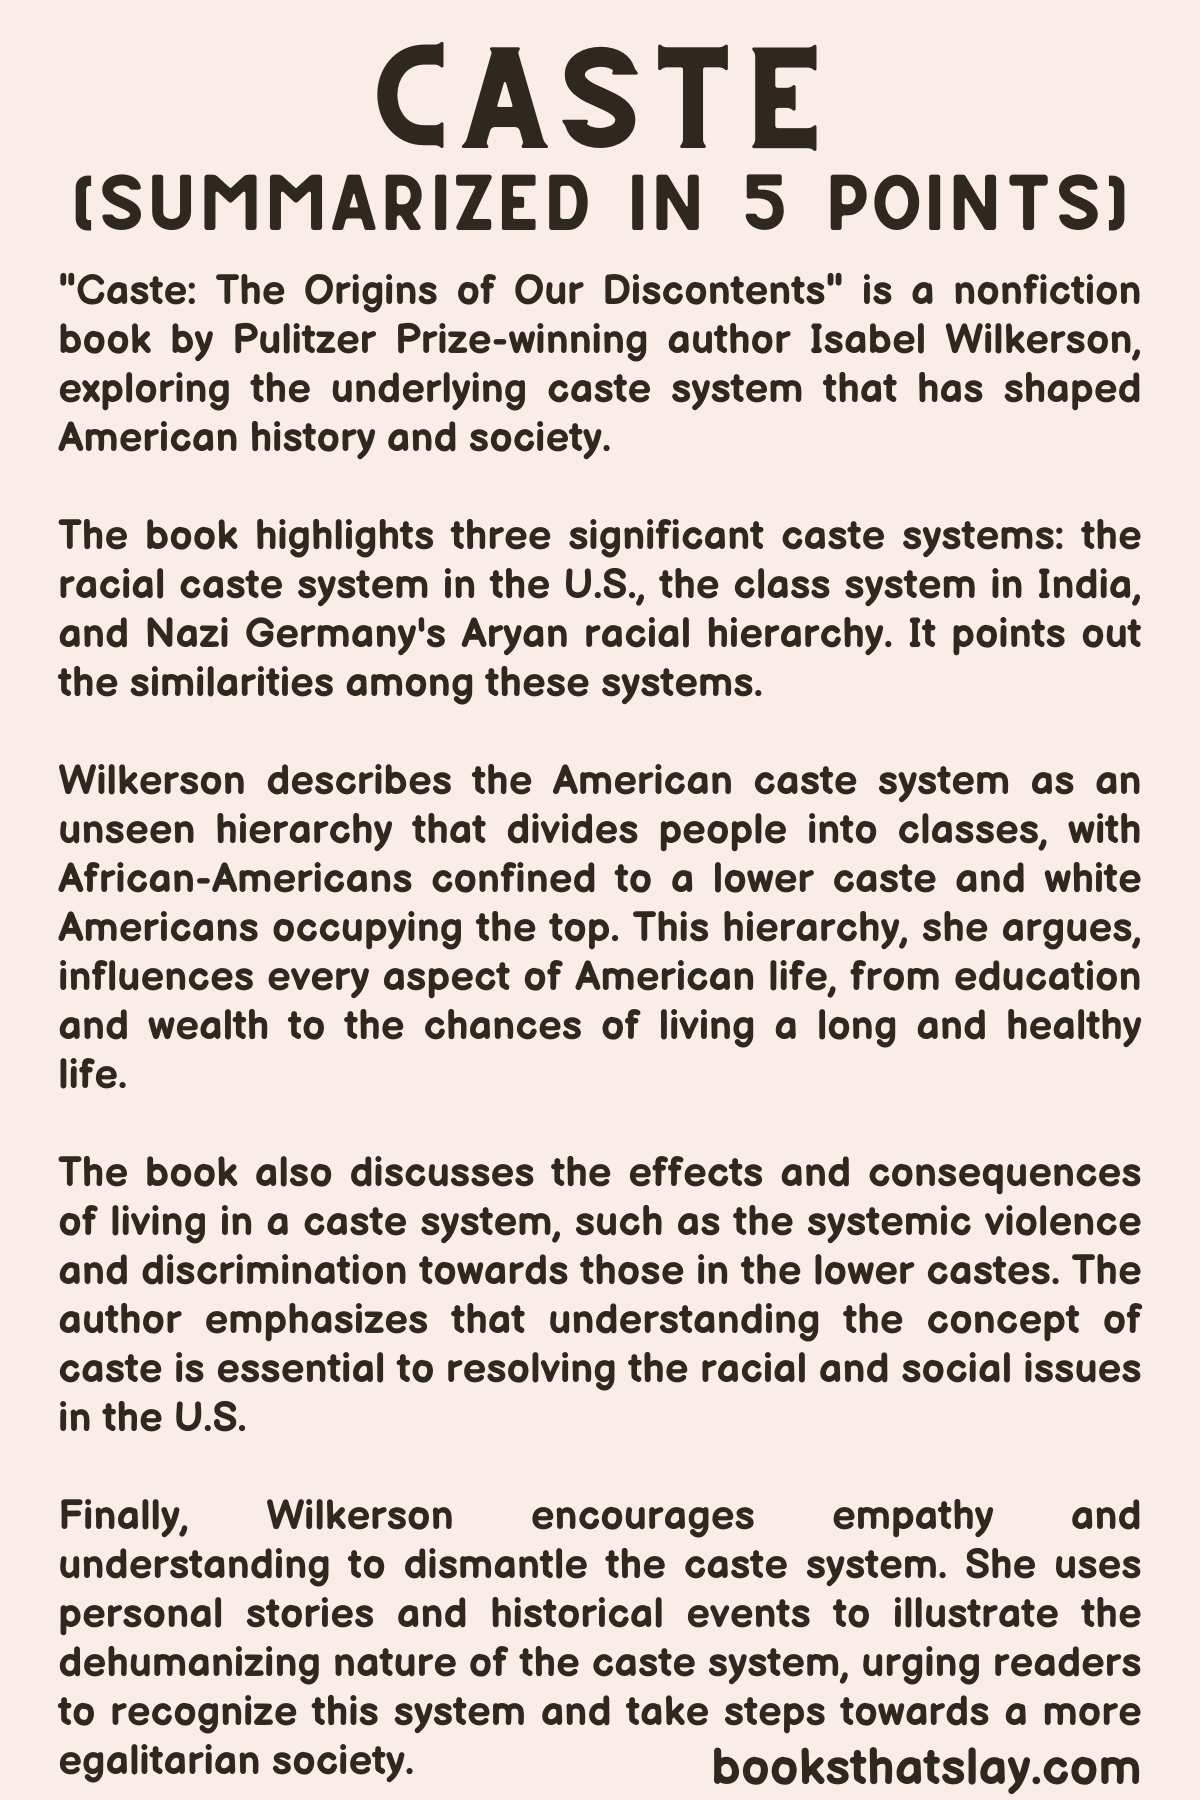 Caste by Isabel Wilkerson Summary Infographic